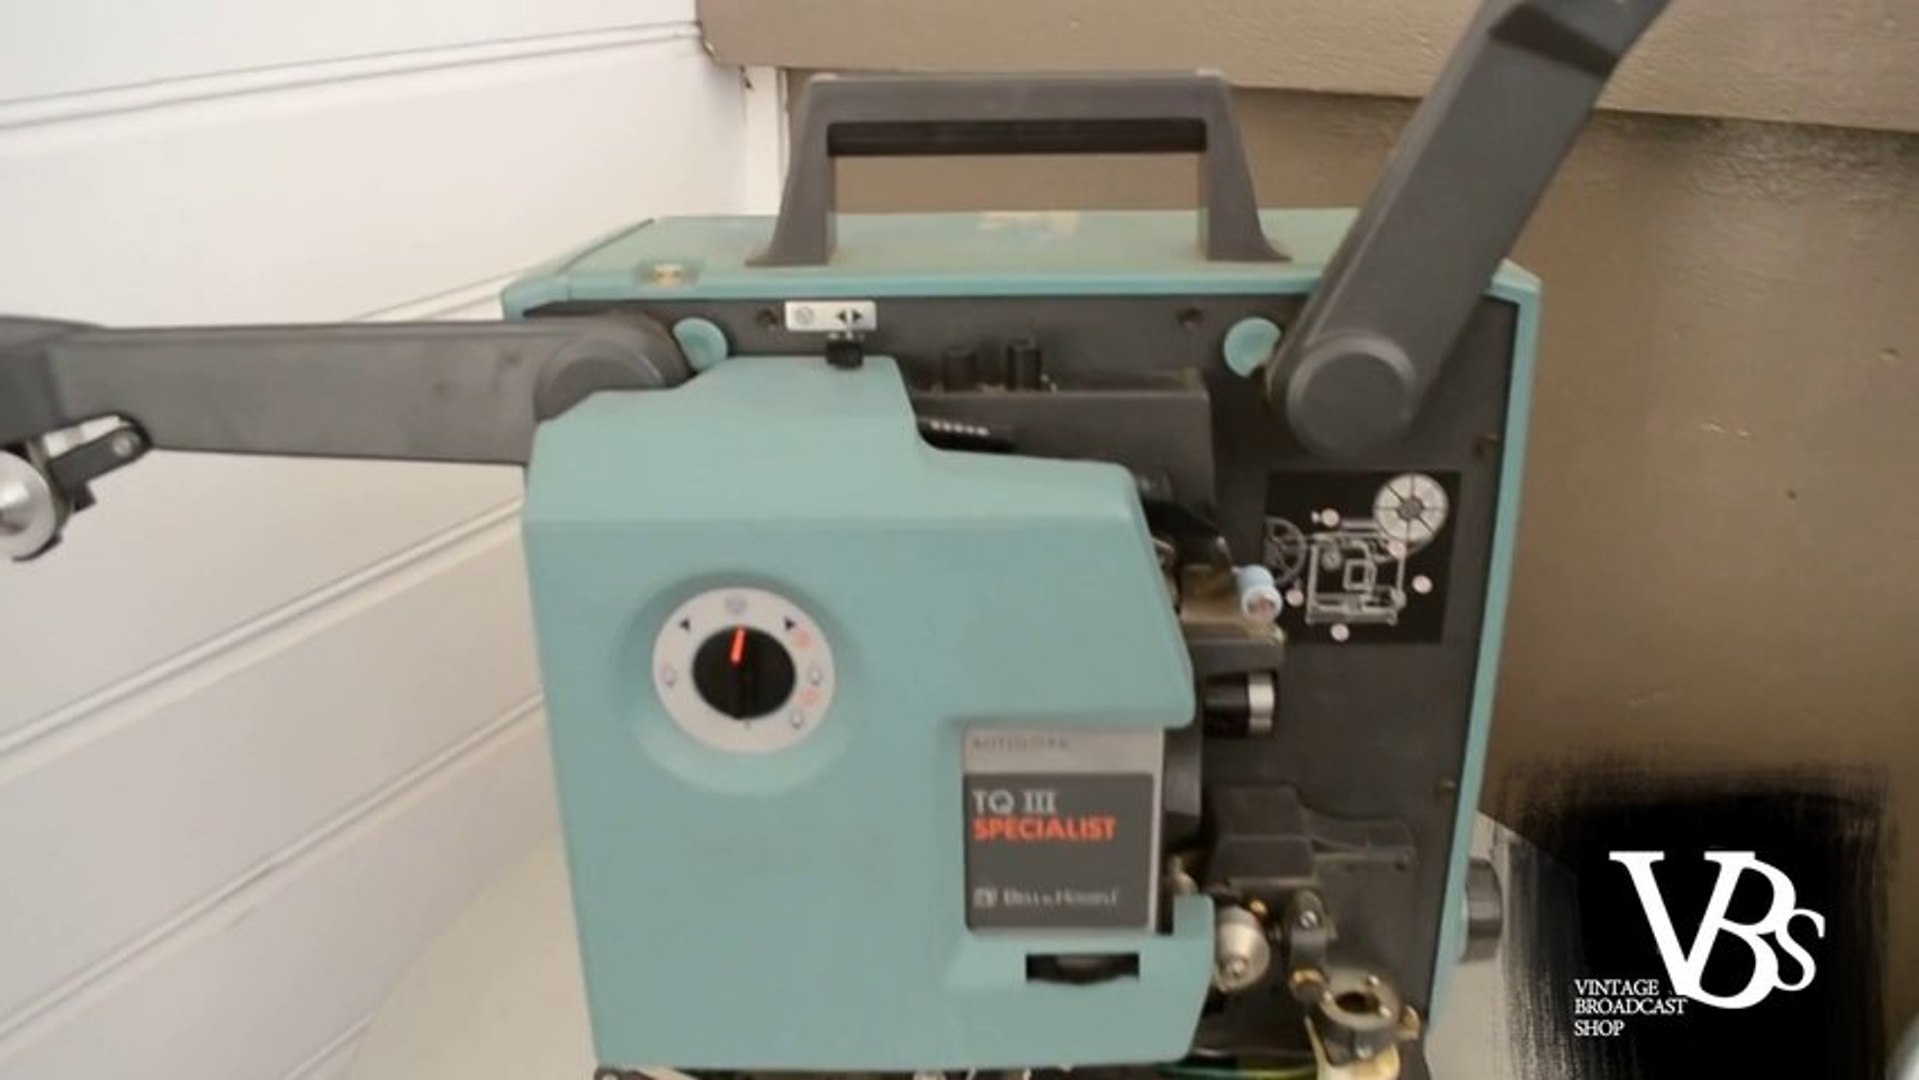 Bell and Howell TQ III Autoload Specialist - Video Dailymotion